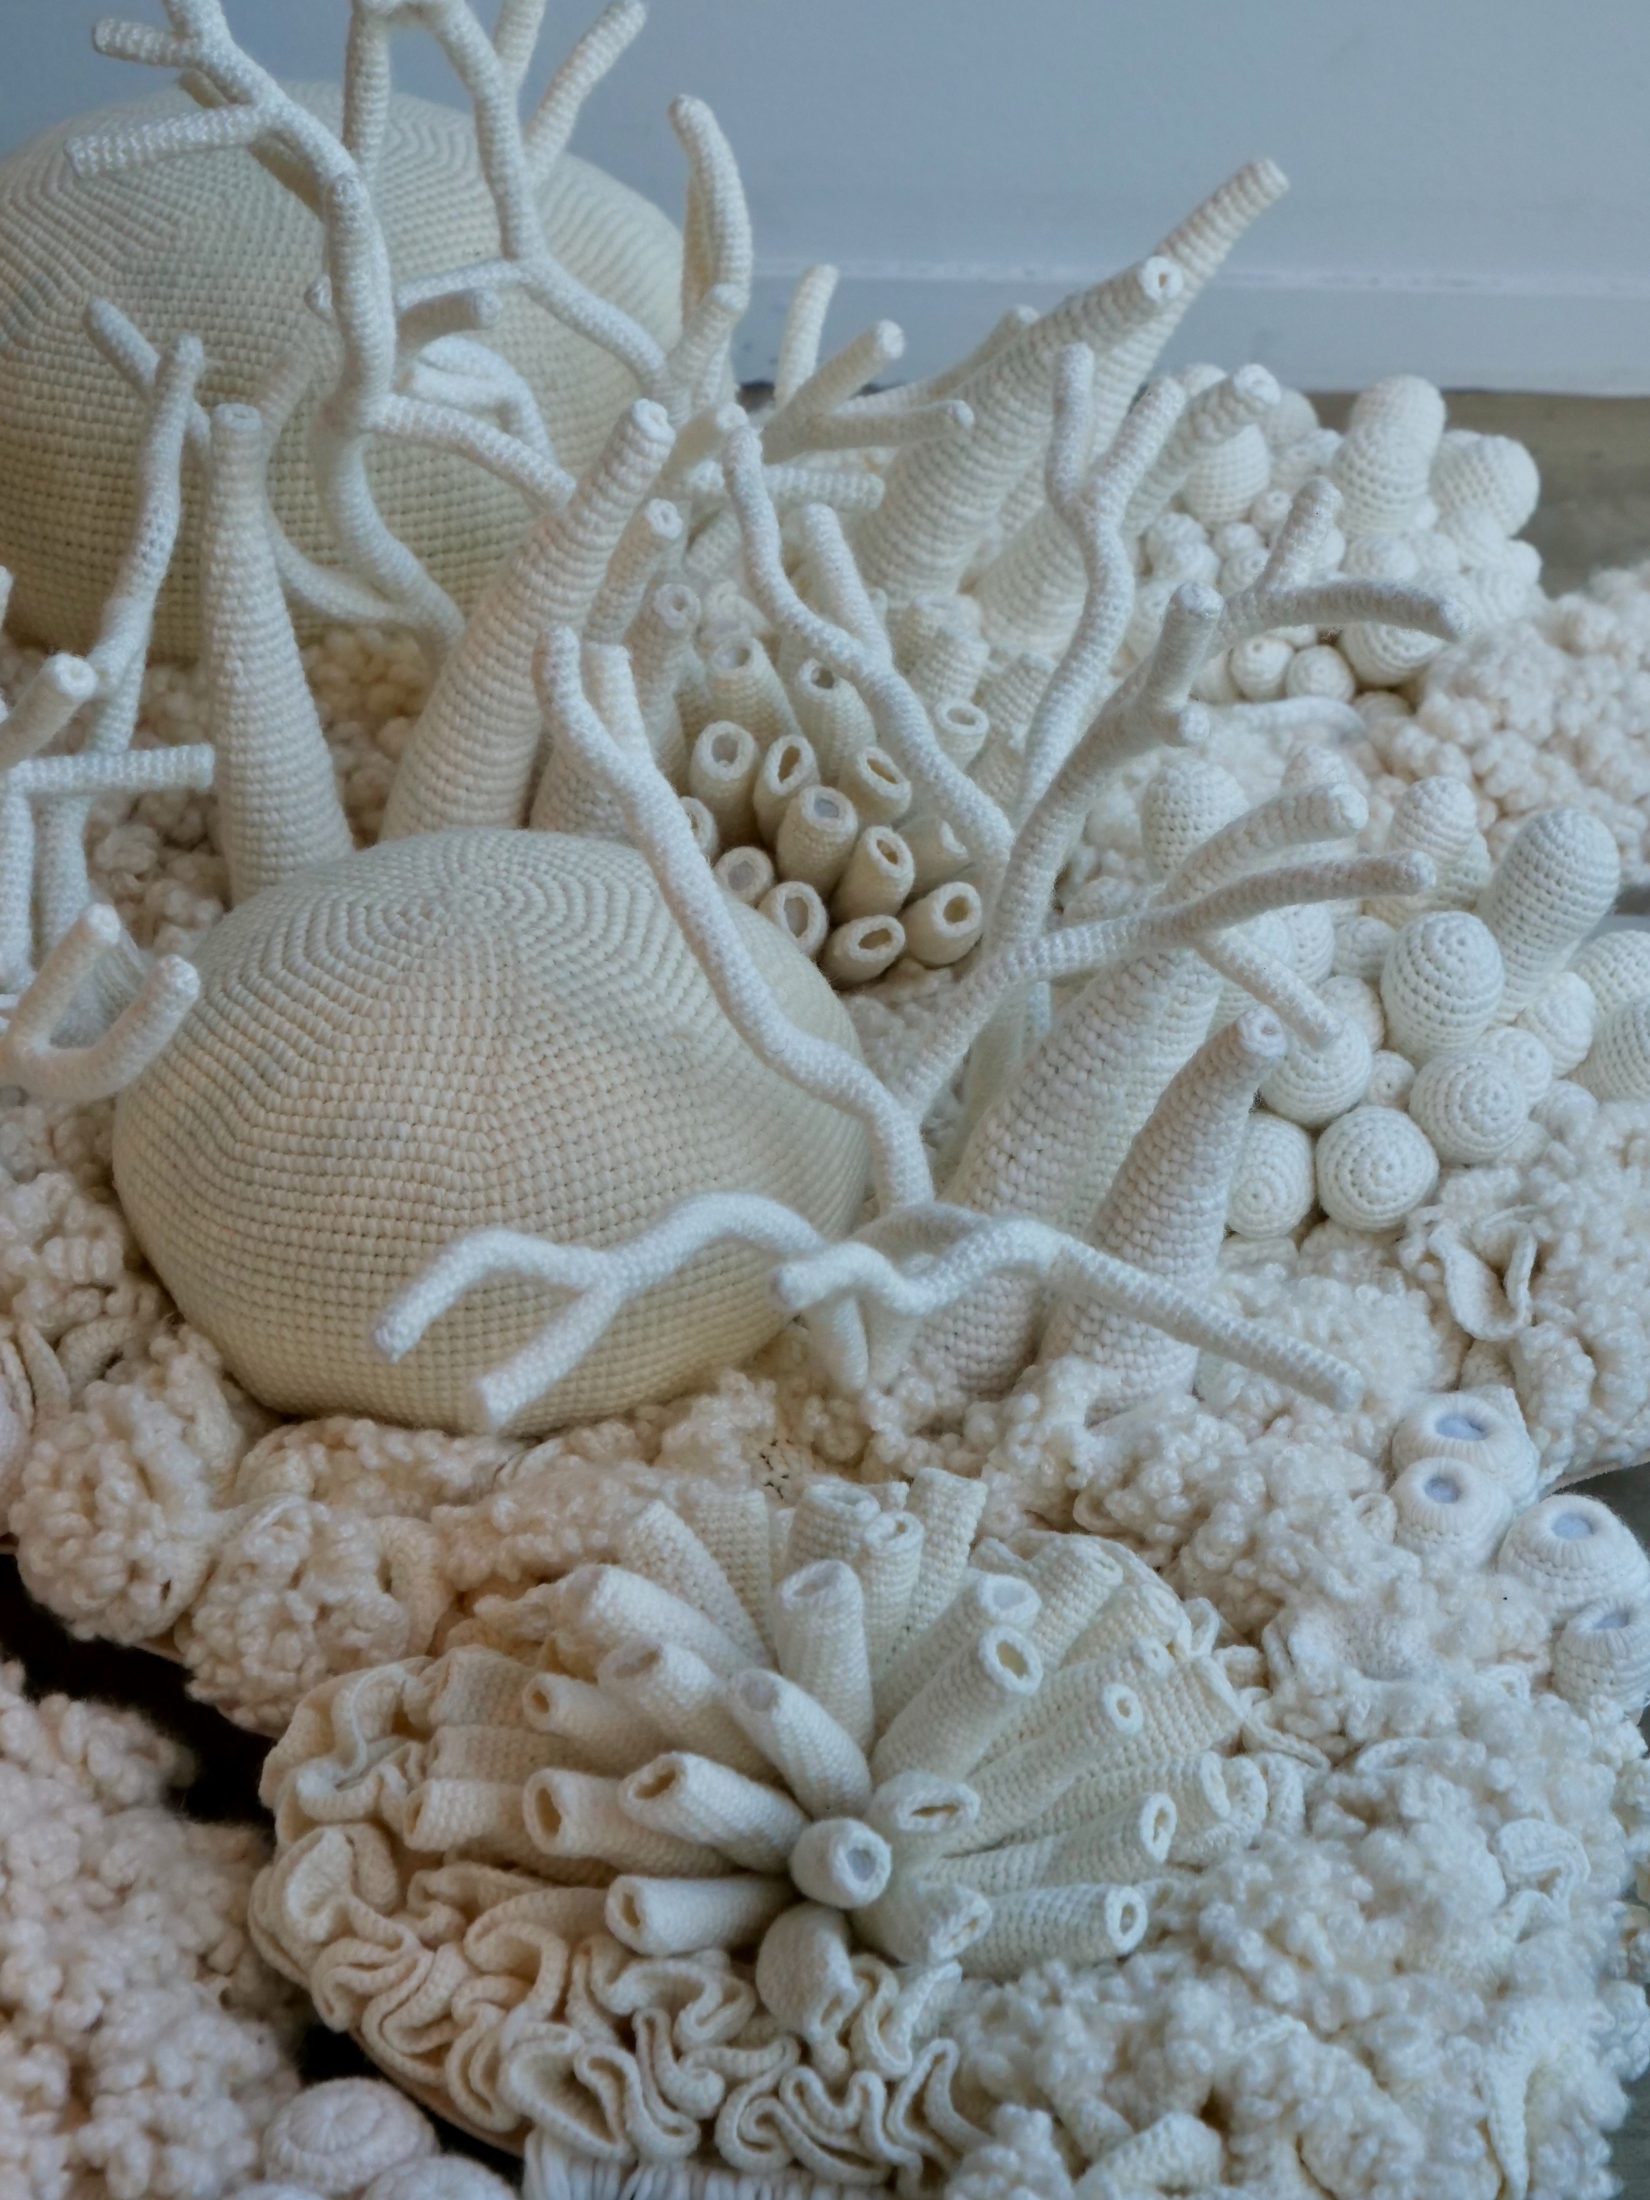 “Bleached” coral on floor